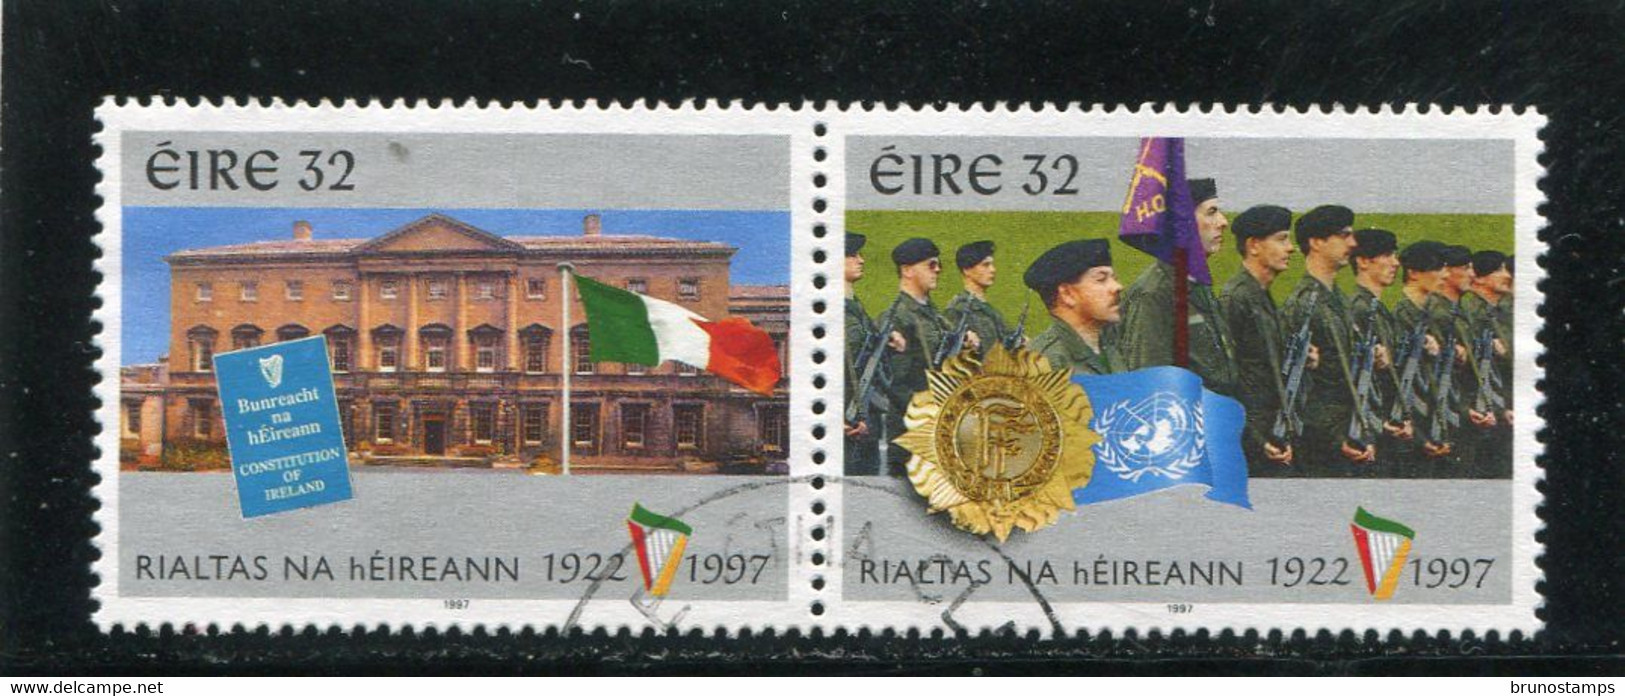 IRELAND/EIRE - 1997  32p  REPUBLIC ANNIVERSARY PAIR  FINE USED - Used Stamps